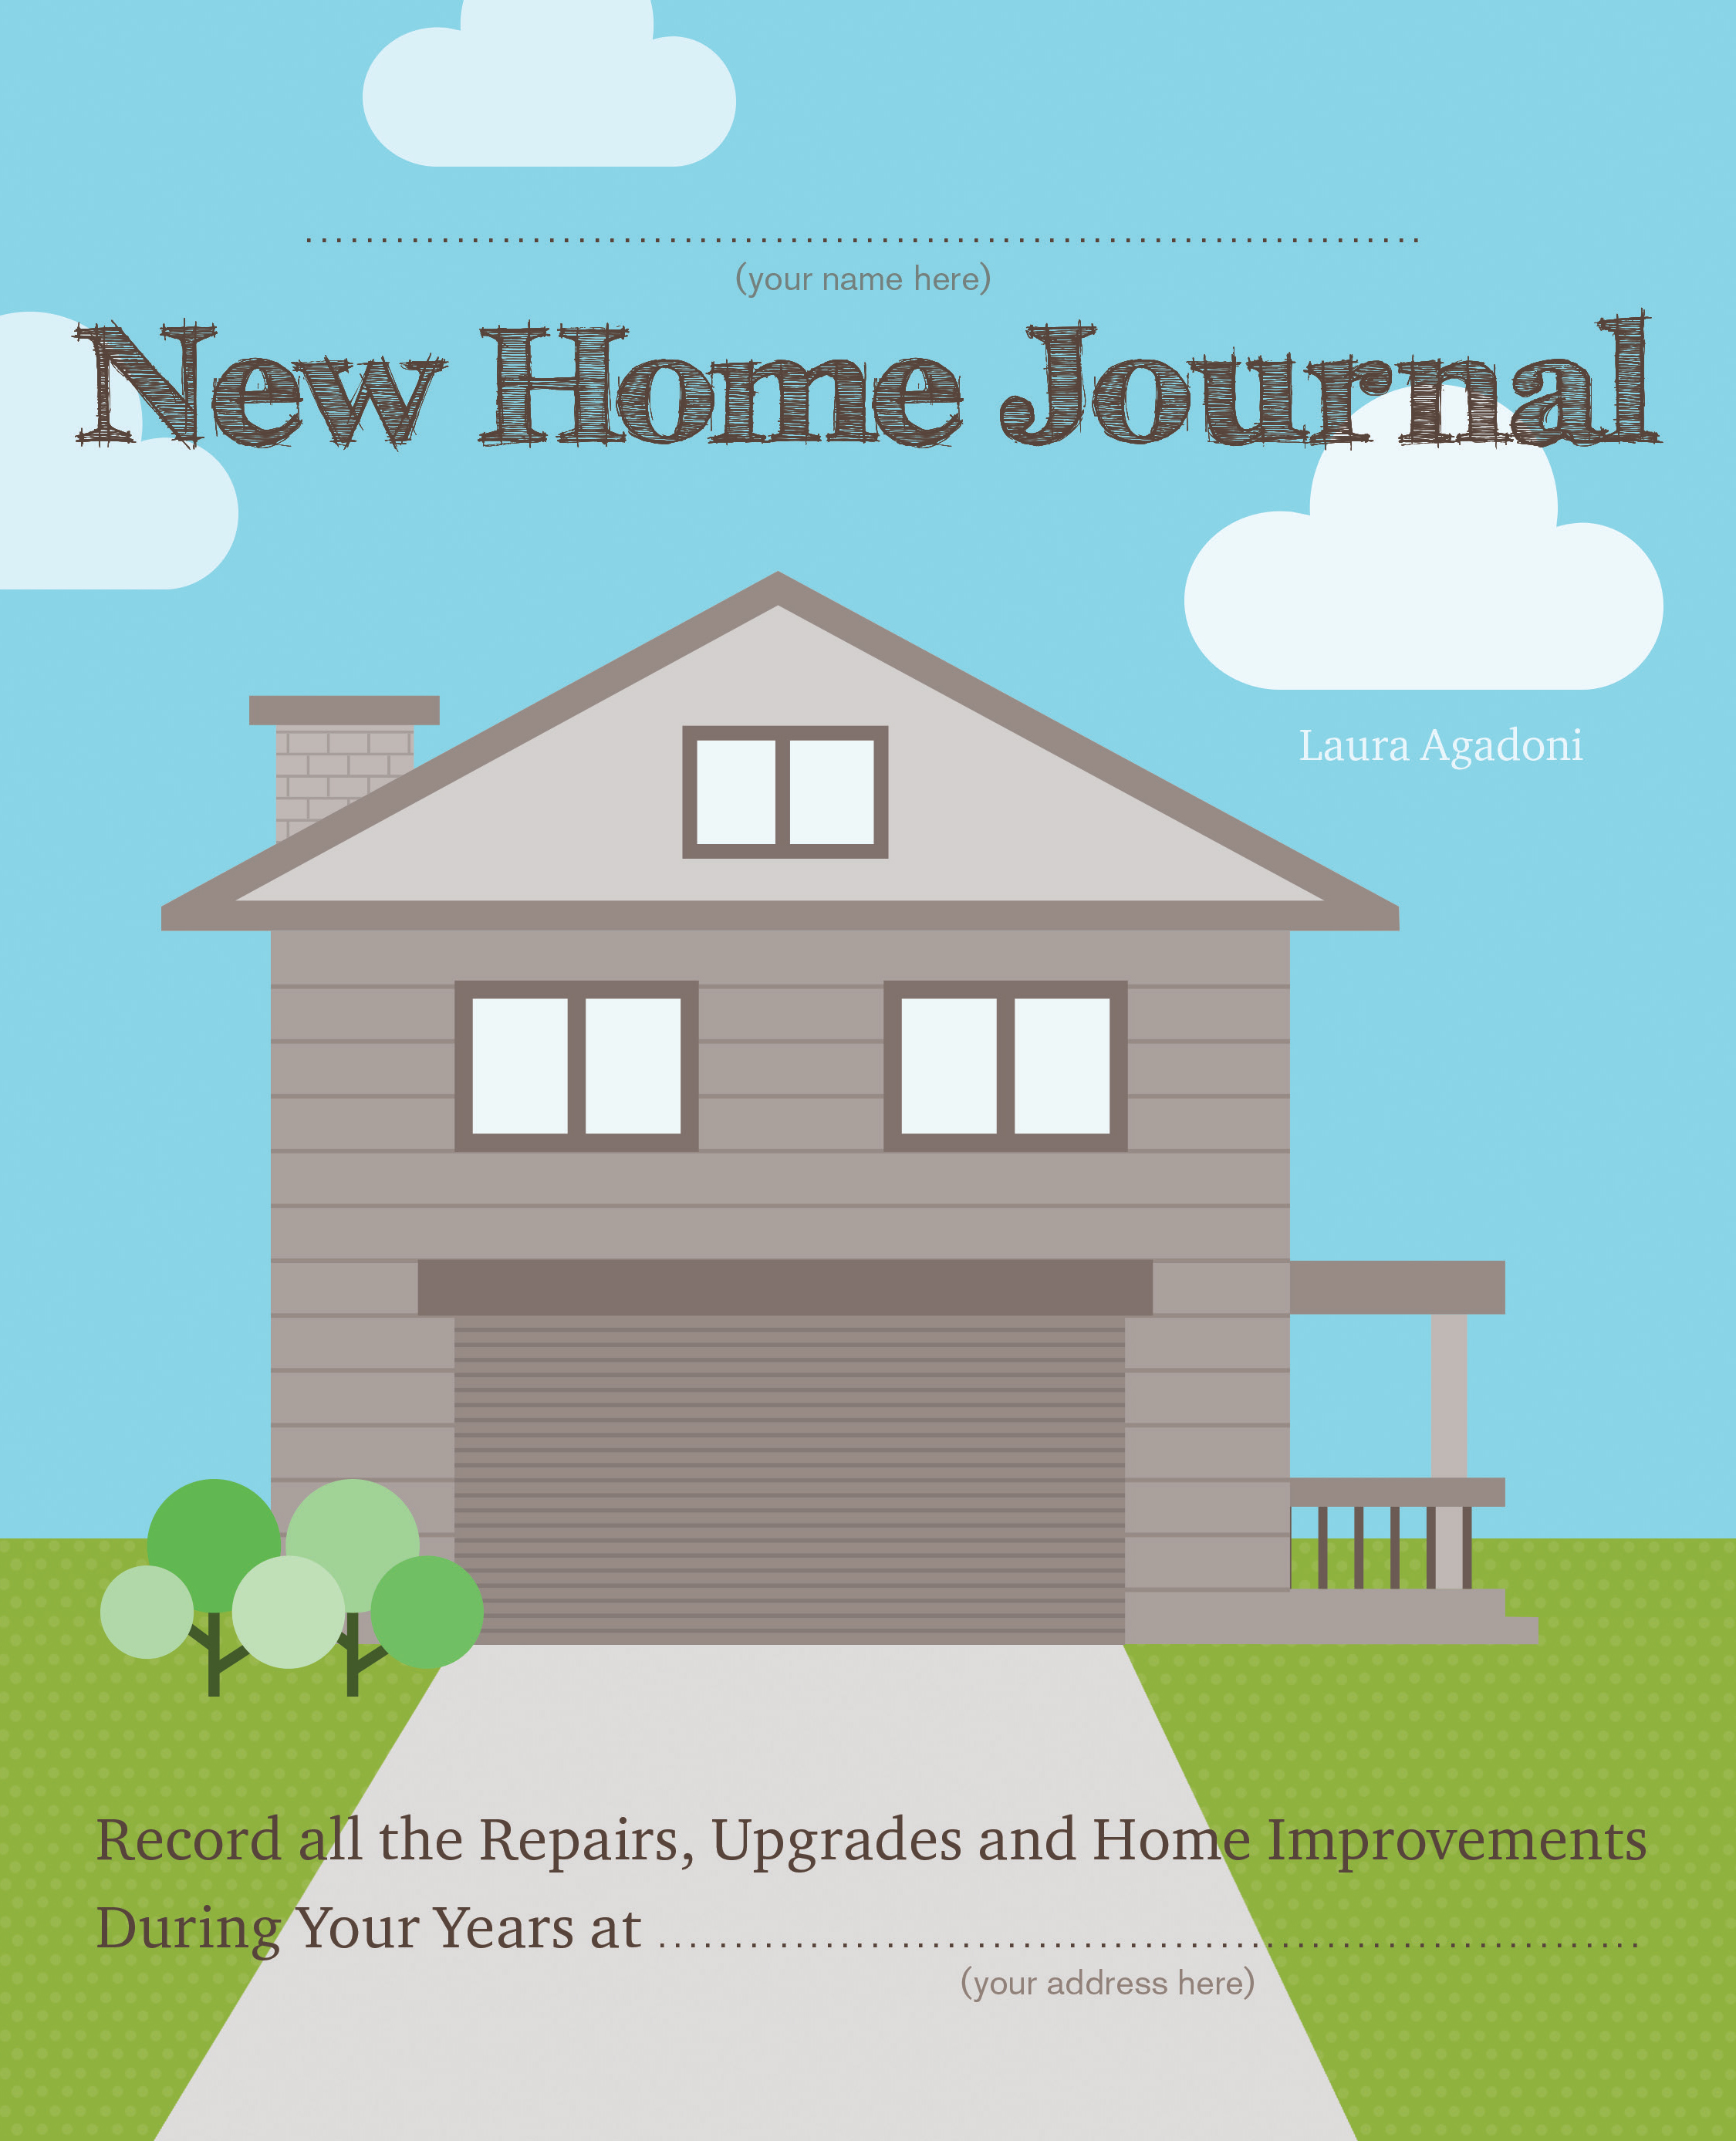 New Home Journal